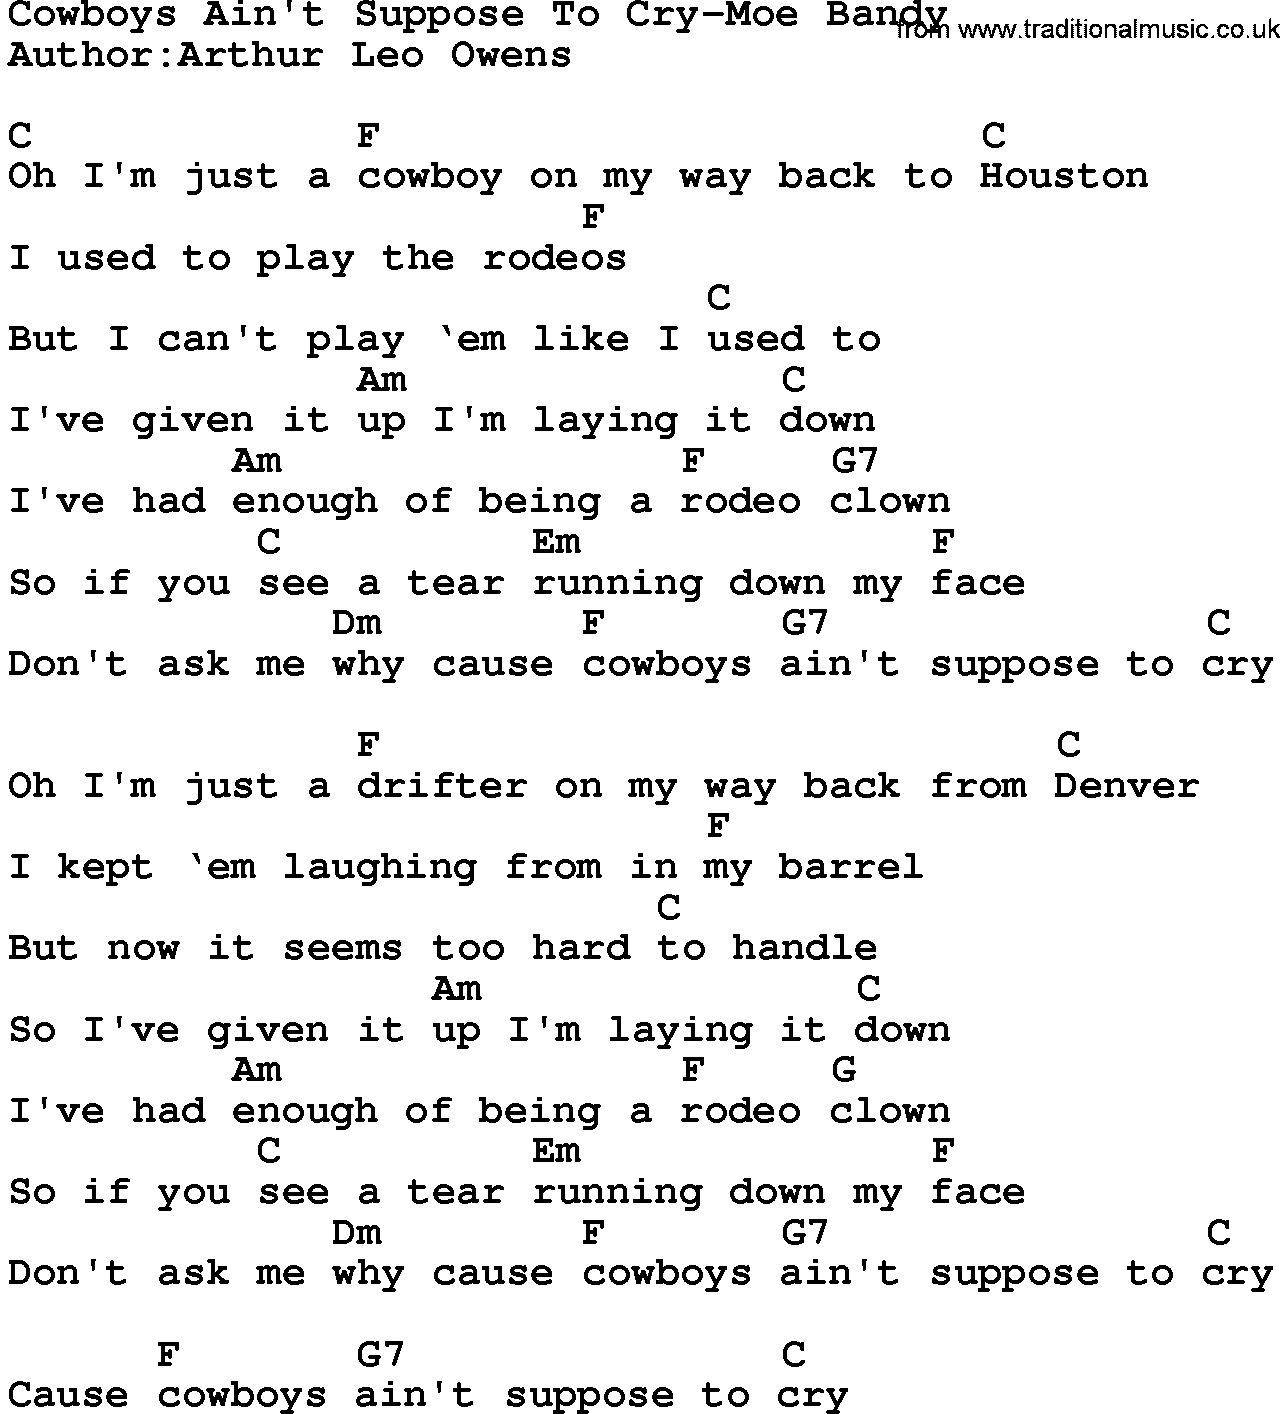 Country music song: Cowboys Ain't Suppose To Cry-Moe Bandy lyrics and chords